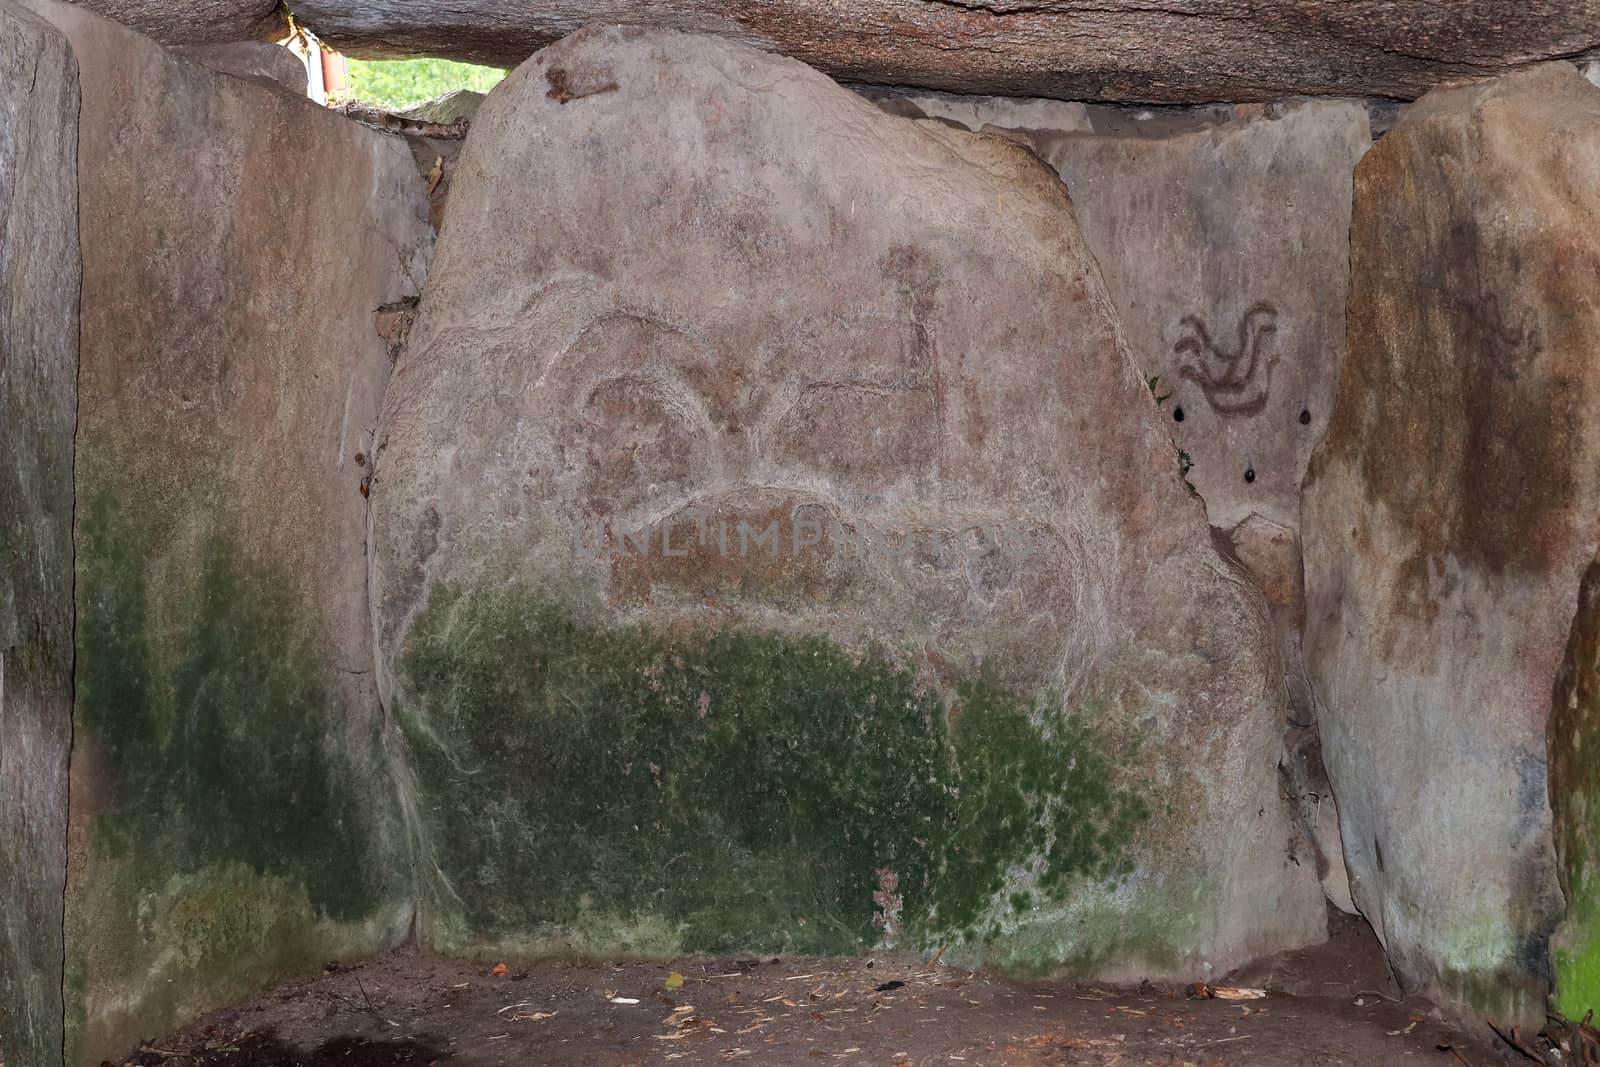 Engravings on stones in the tumulus Mane Lud near Locmariaqur in by Mibuch